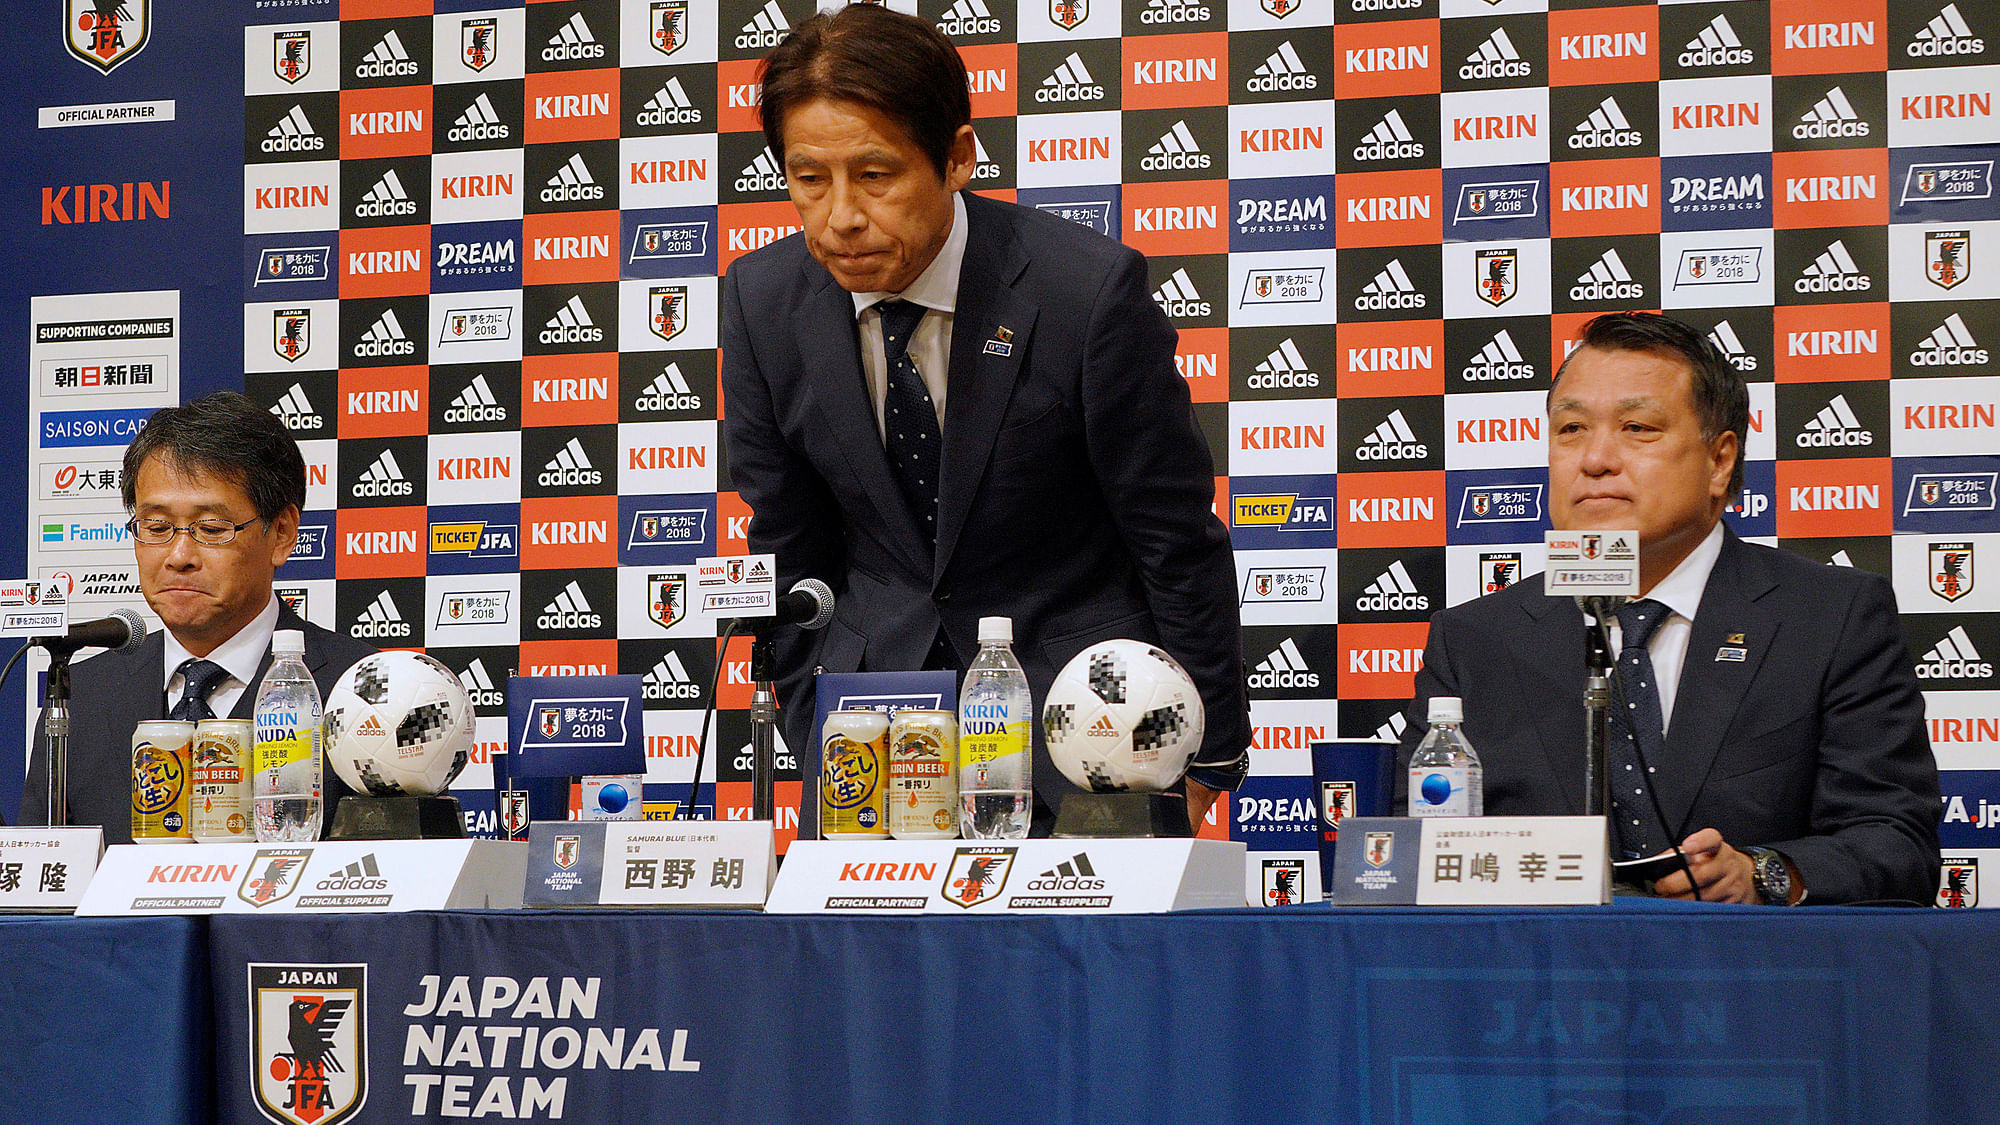 Japanese men’s national soccer coach Akira Nishino, centre, bows at the start of a press conference to announce Japanese squad members for the World Cup.